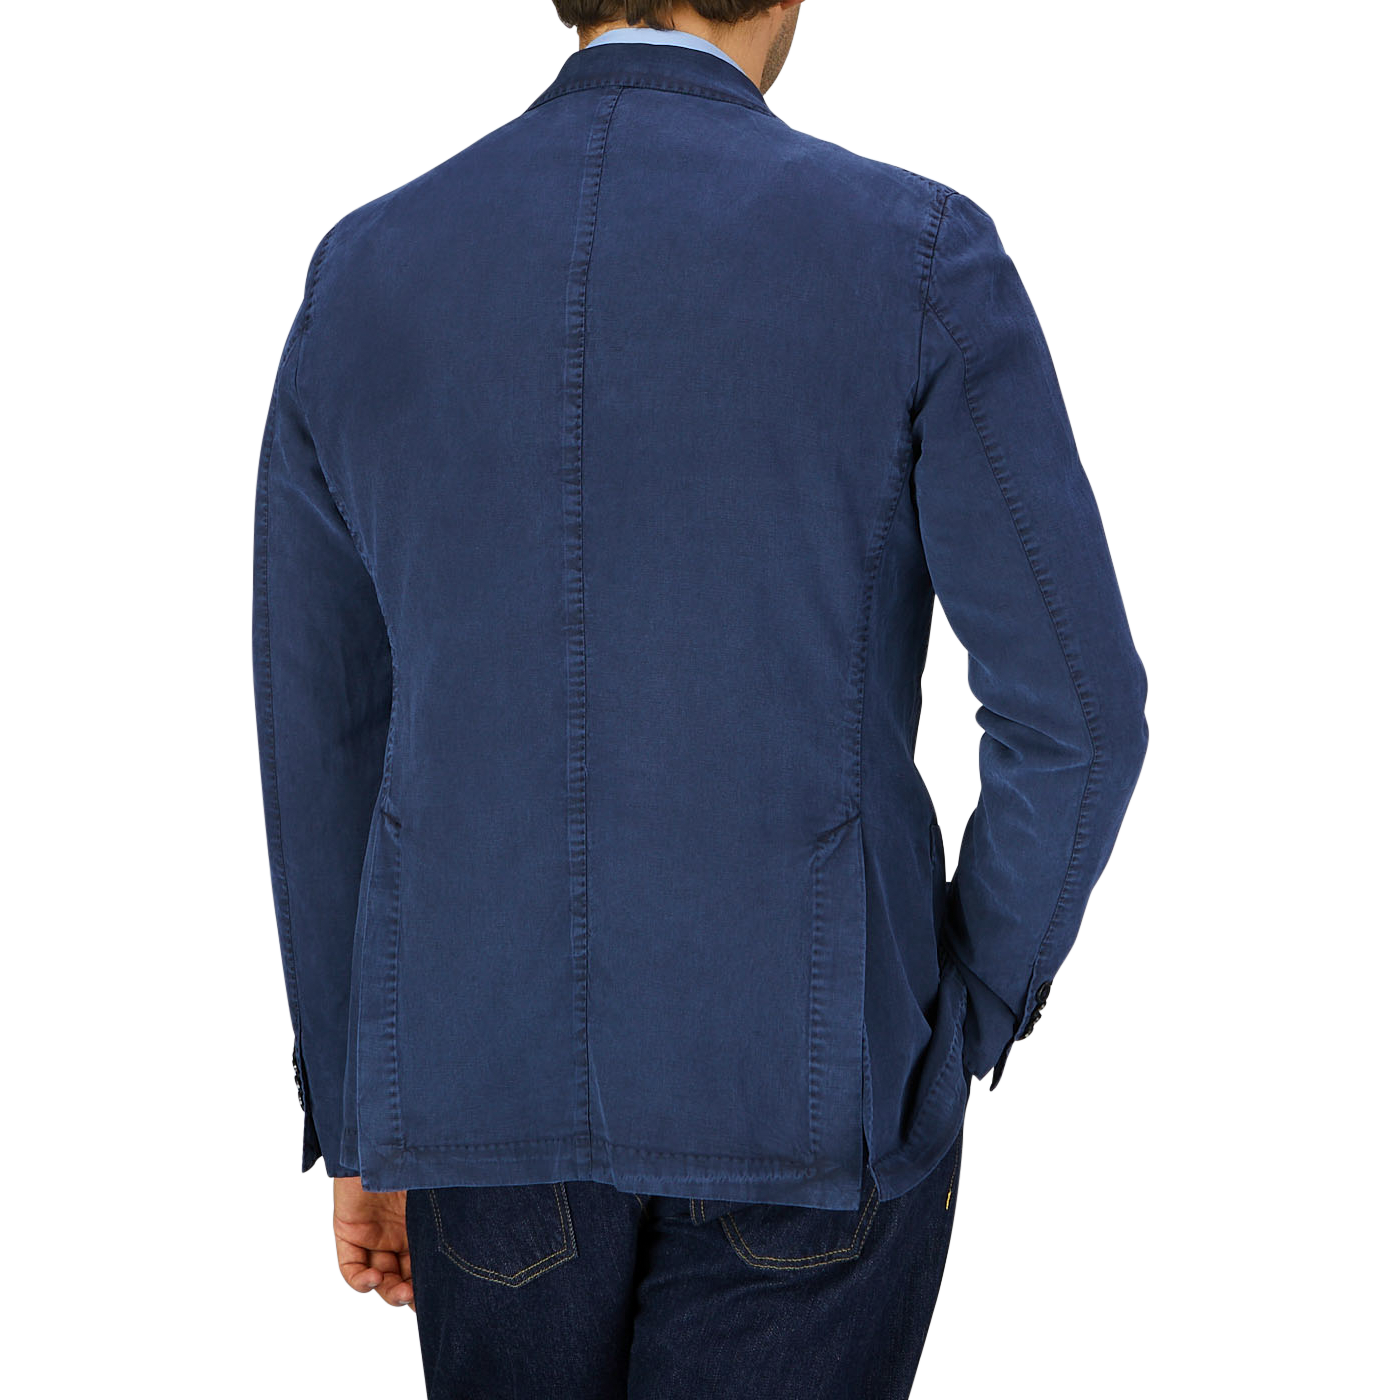 A man seen from the back wearing a Navy Blue Washed Cotton Linen Blazer and jeans, both reflecting exquisite Italian tailoring by L.B.M. 1911.